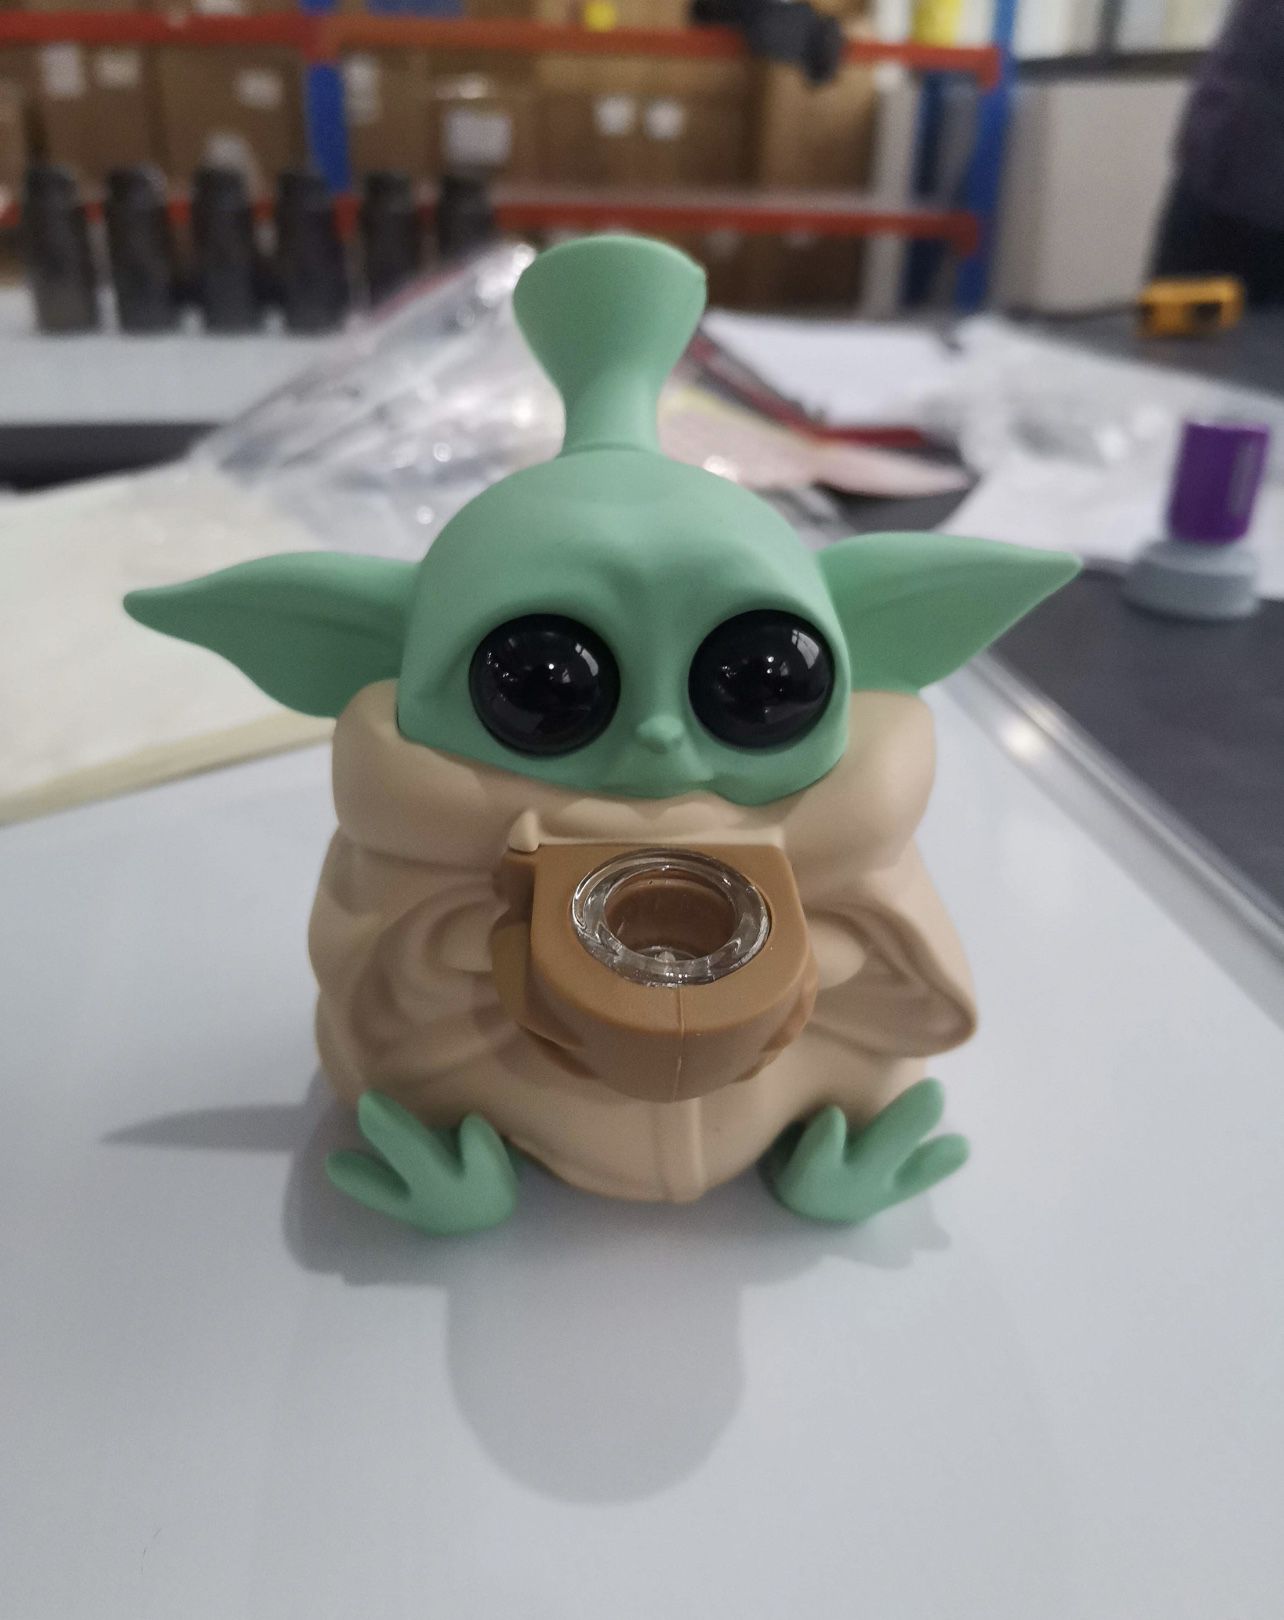 4.5 Inches Silicone Baby Yoda (Grogu) Product with 9 Hole Glass bowl.